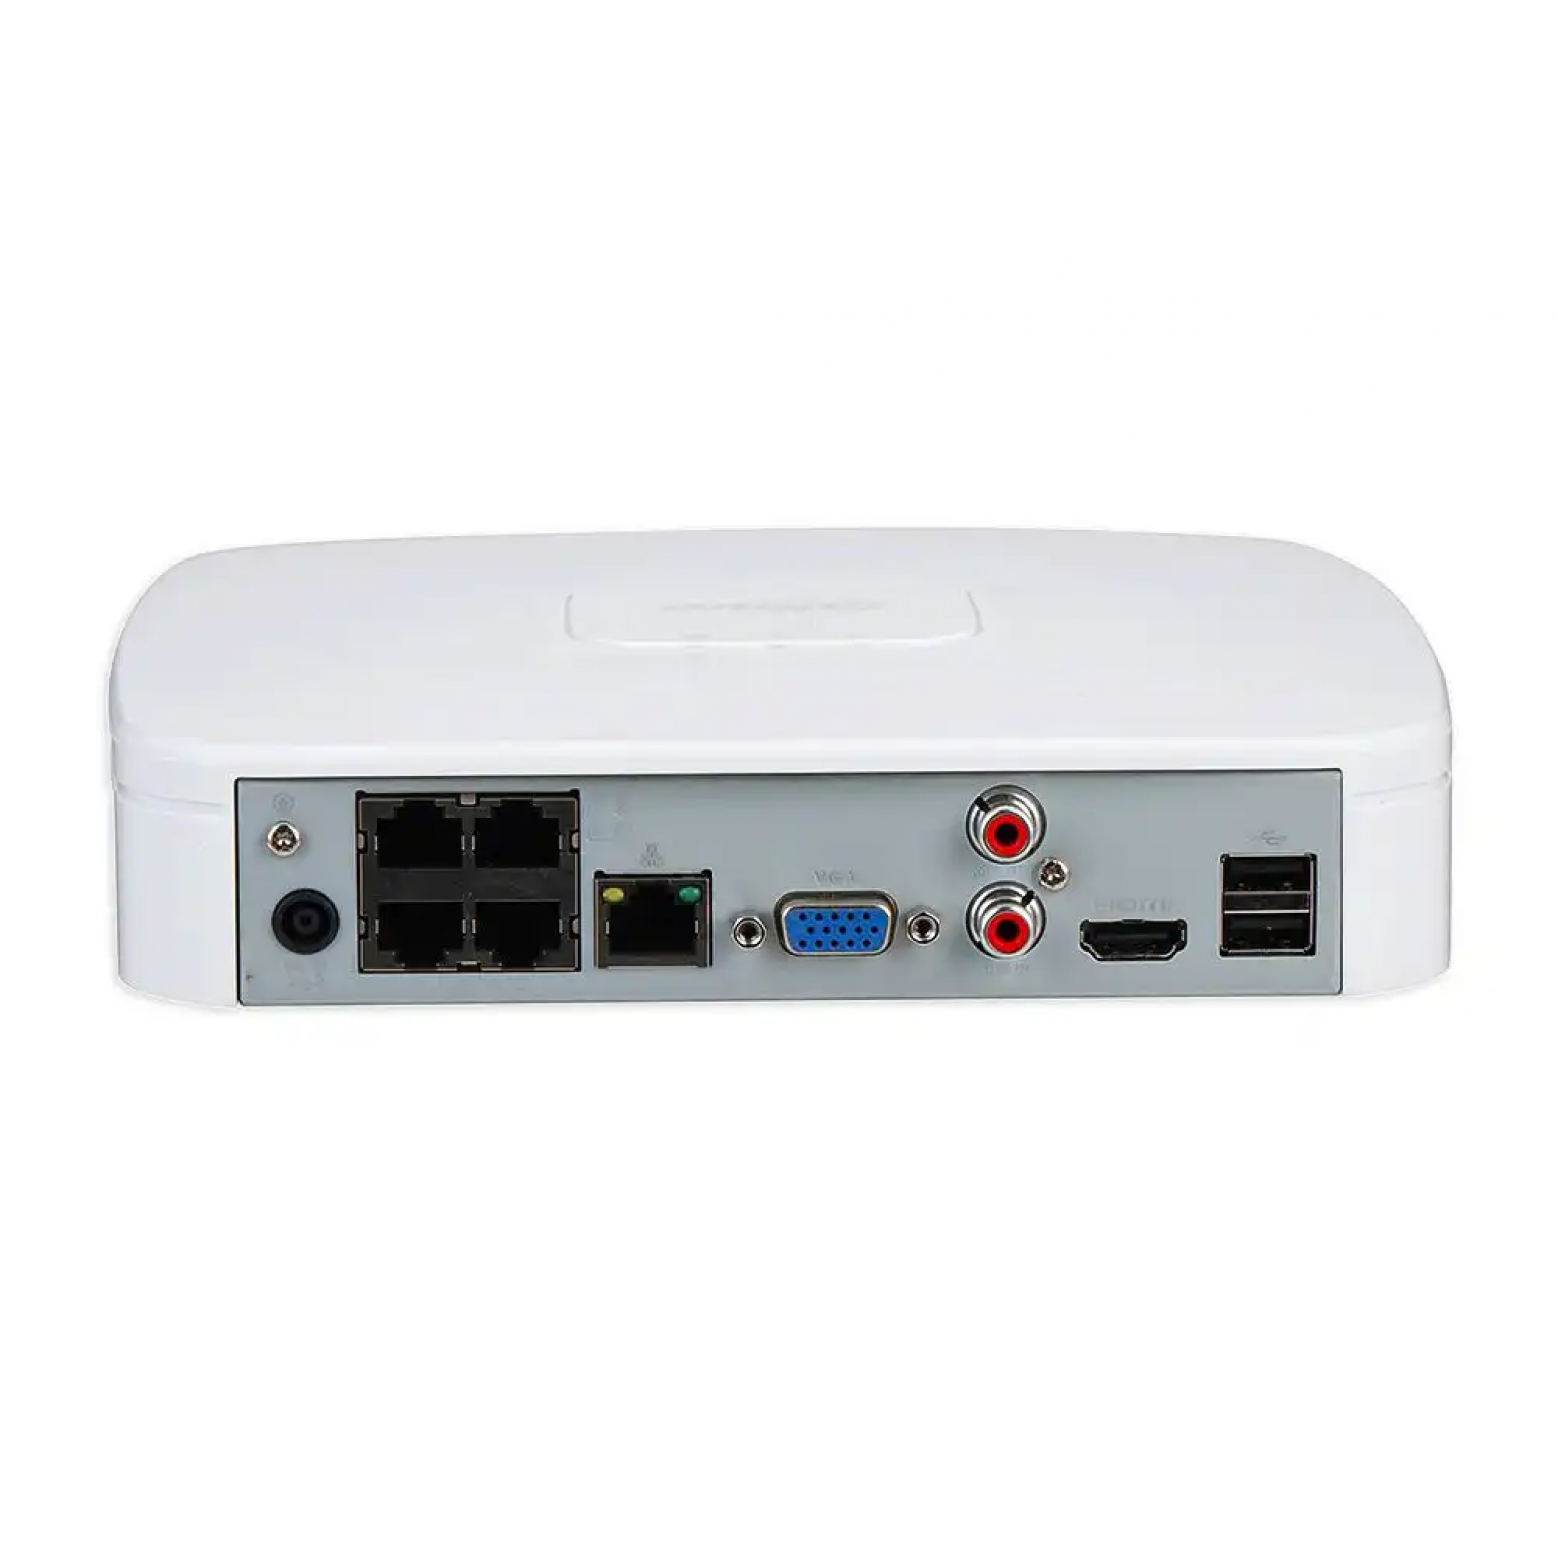 Dahua NVR4104-P-EI Network Video Recorder 1x LAN 4x PoE Suitable for 4 IP cameras